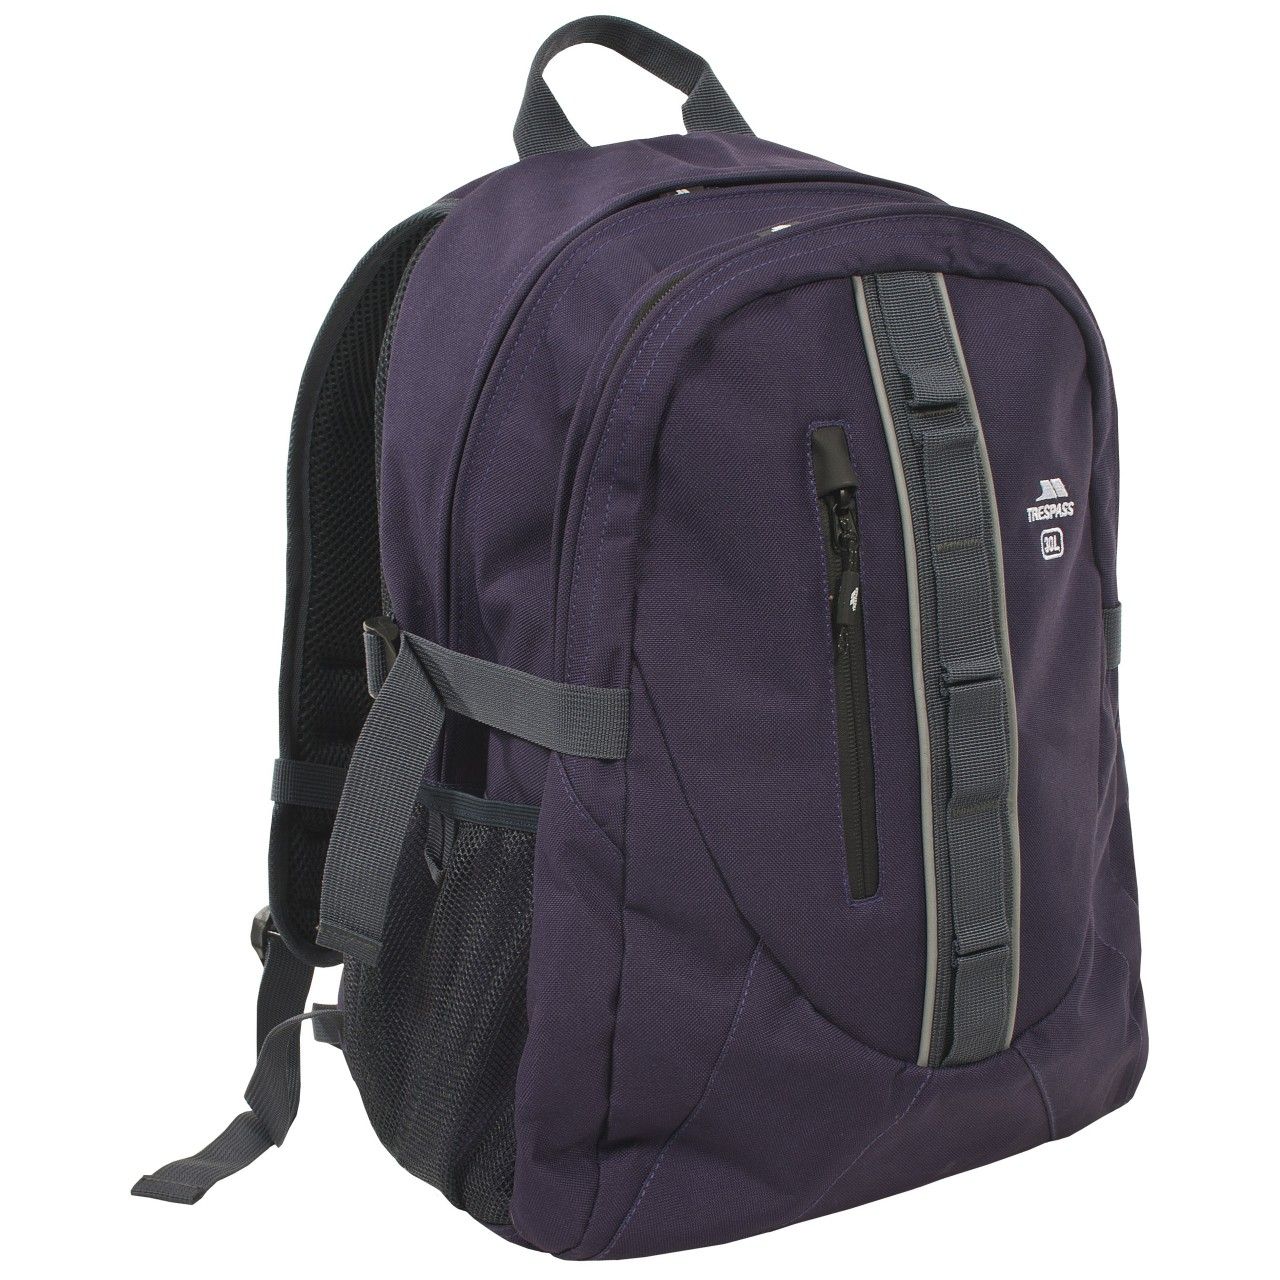 30 Litre backpack. 3 Compartments. Internal padded laptop compartment. Padded back support. Internal organiser. 100% 600D Polyester PVC.